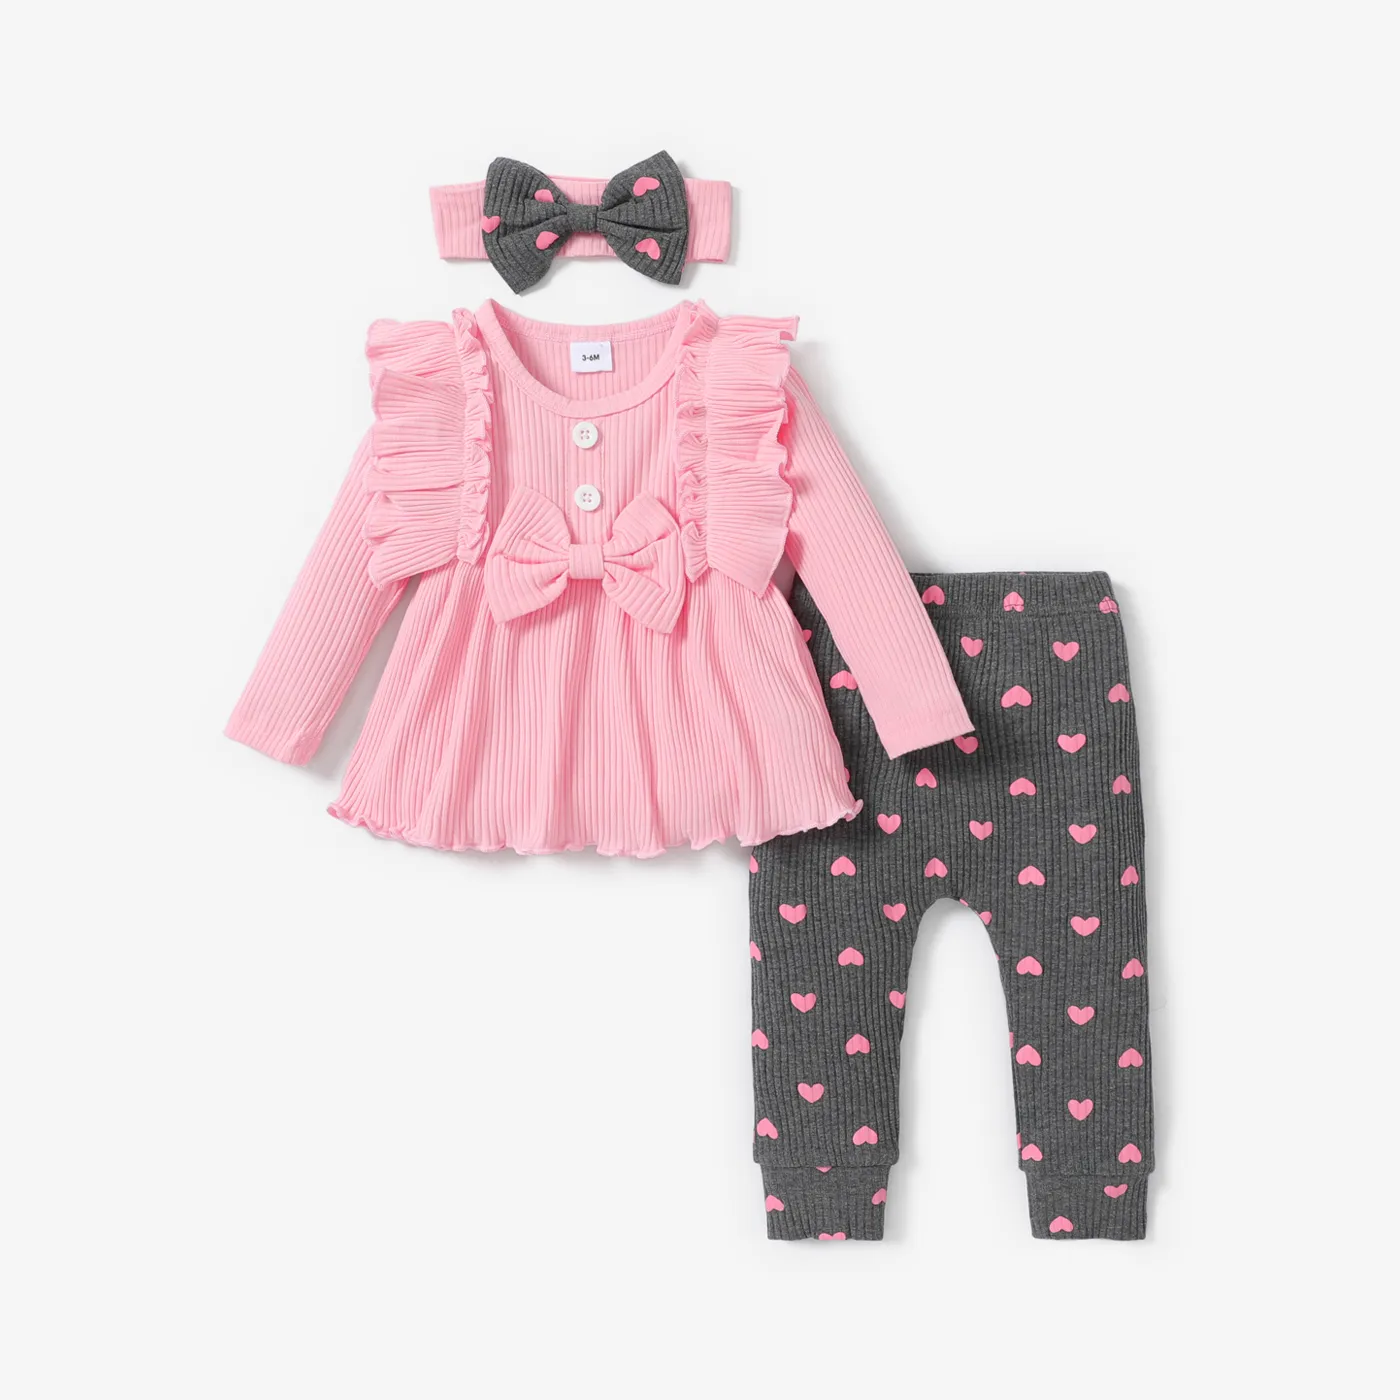 

3pcs Baby Girl 95% Cotton Rib Knit Ruffle Trim Bow Front Long-sleeve Top and Allover Heart Print Leggings with Headband Set